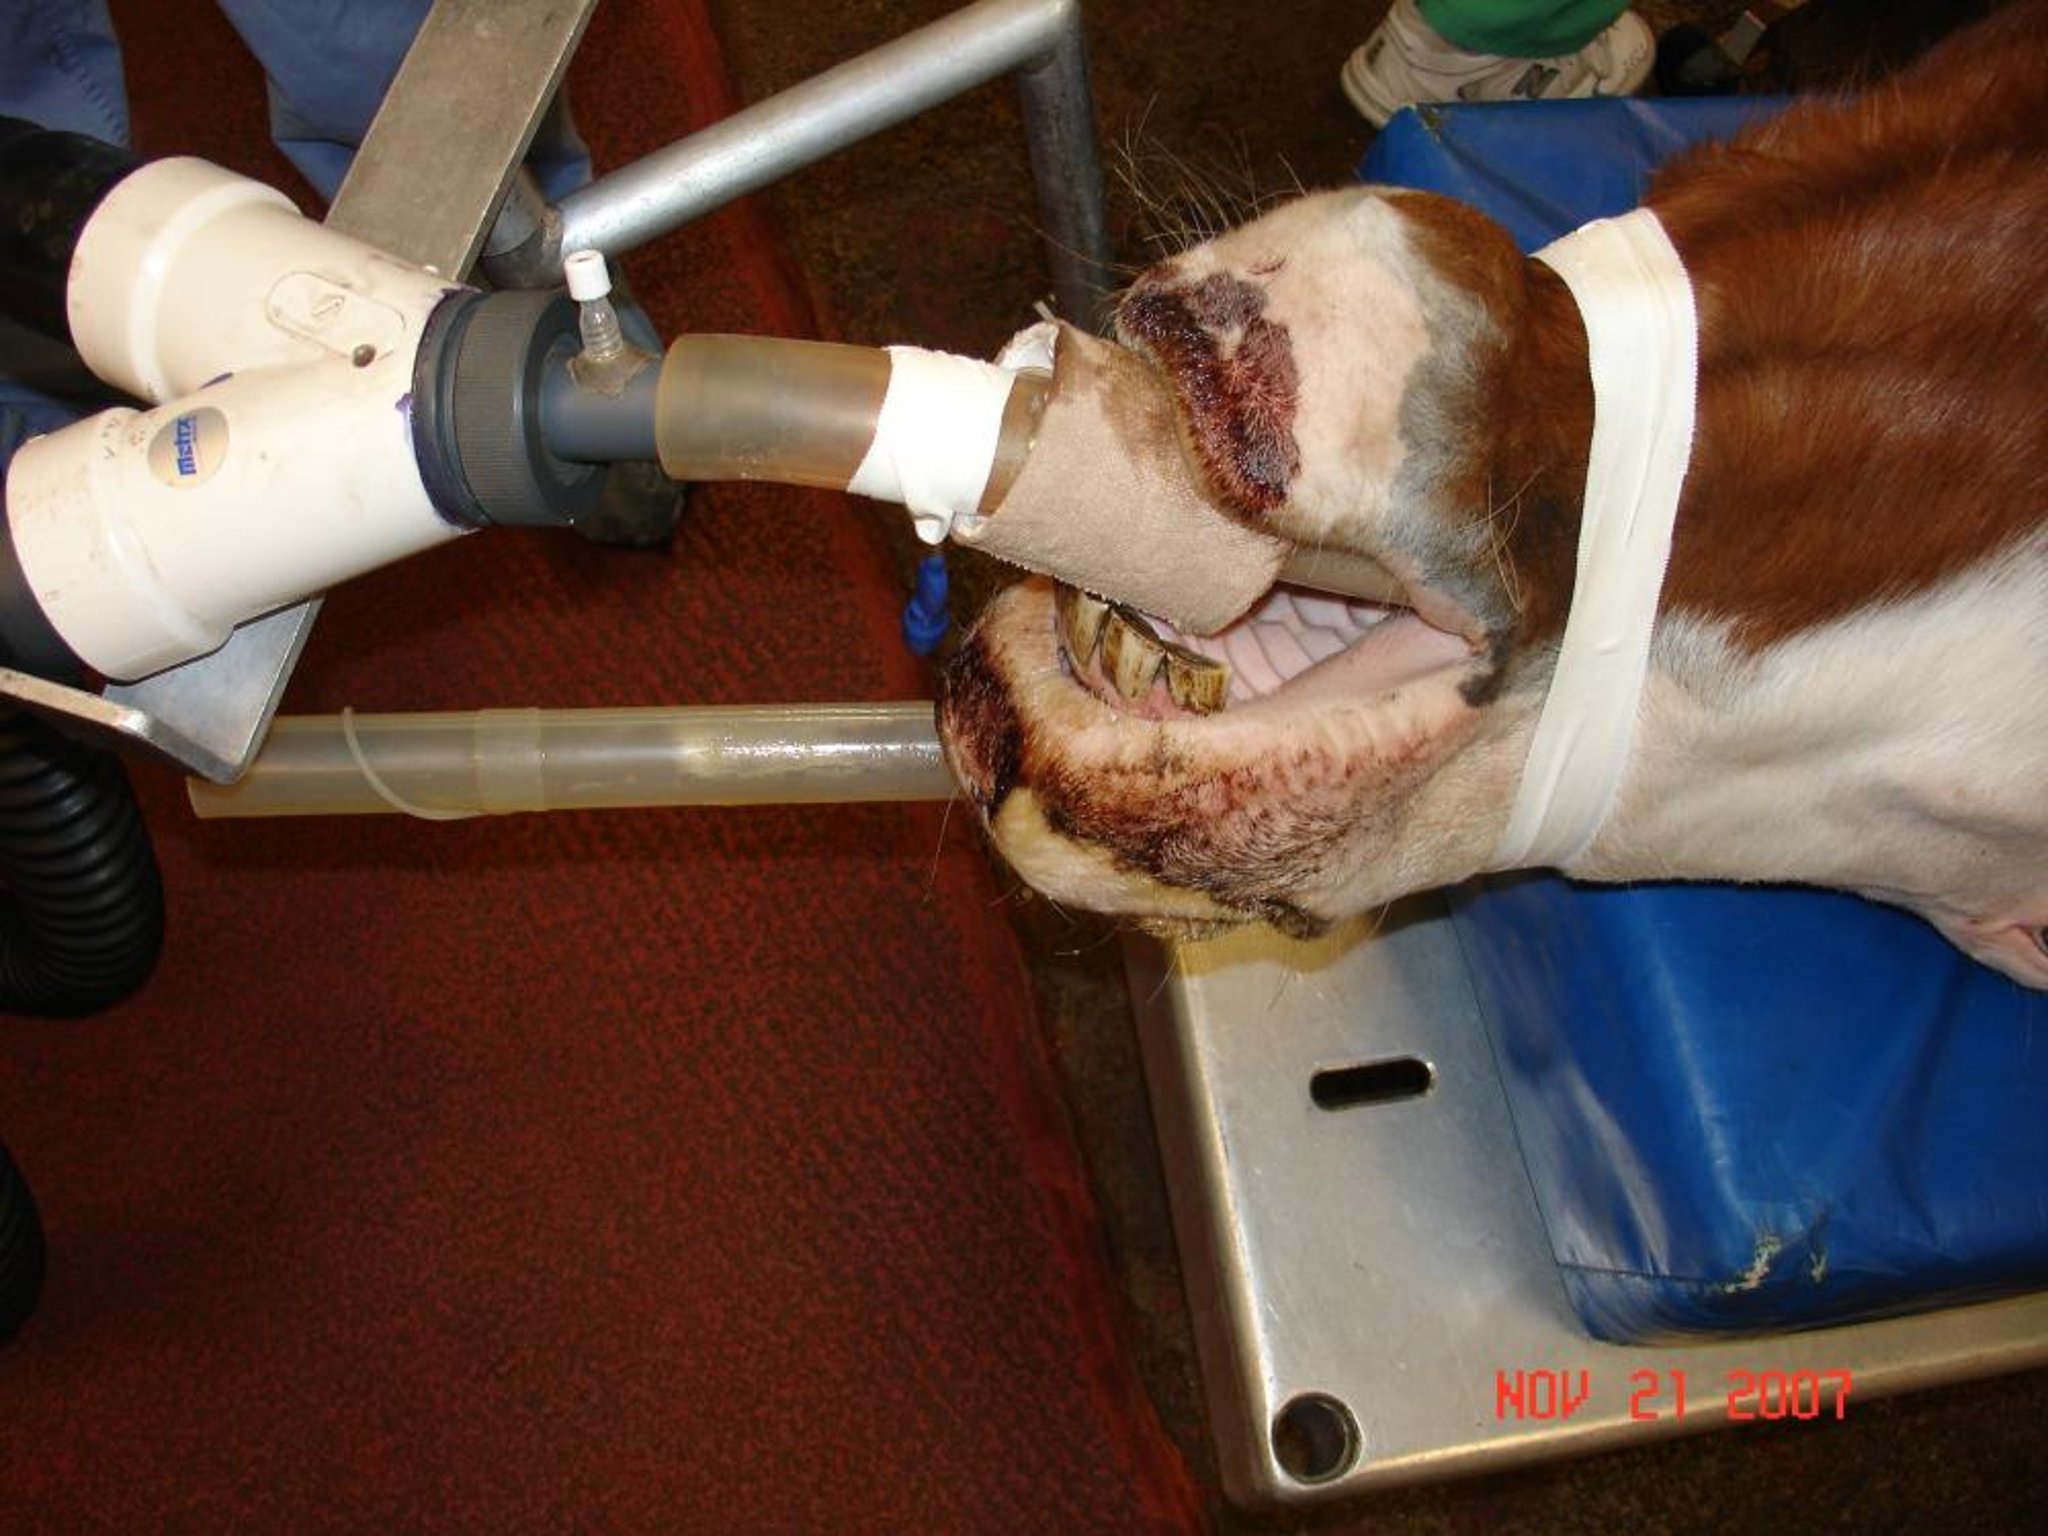 Relief of esophageal obstruction under general anesthesia, horse